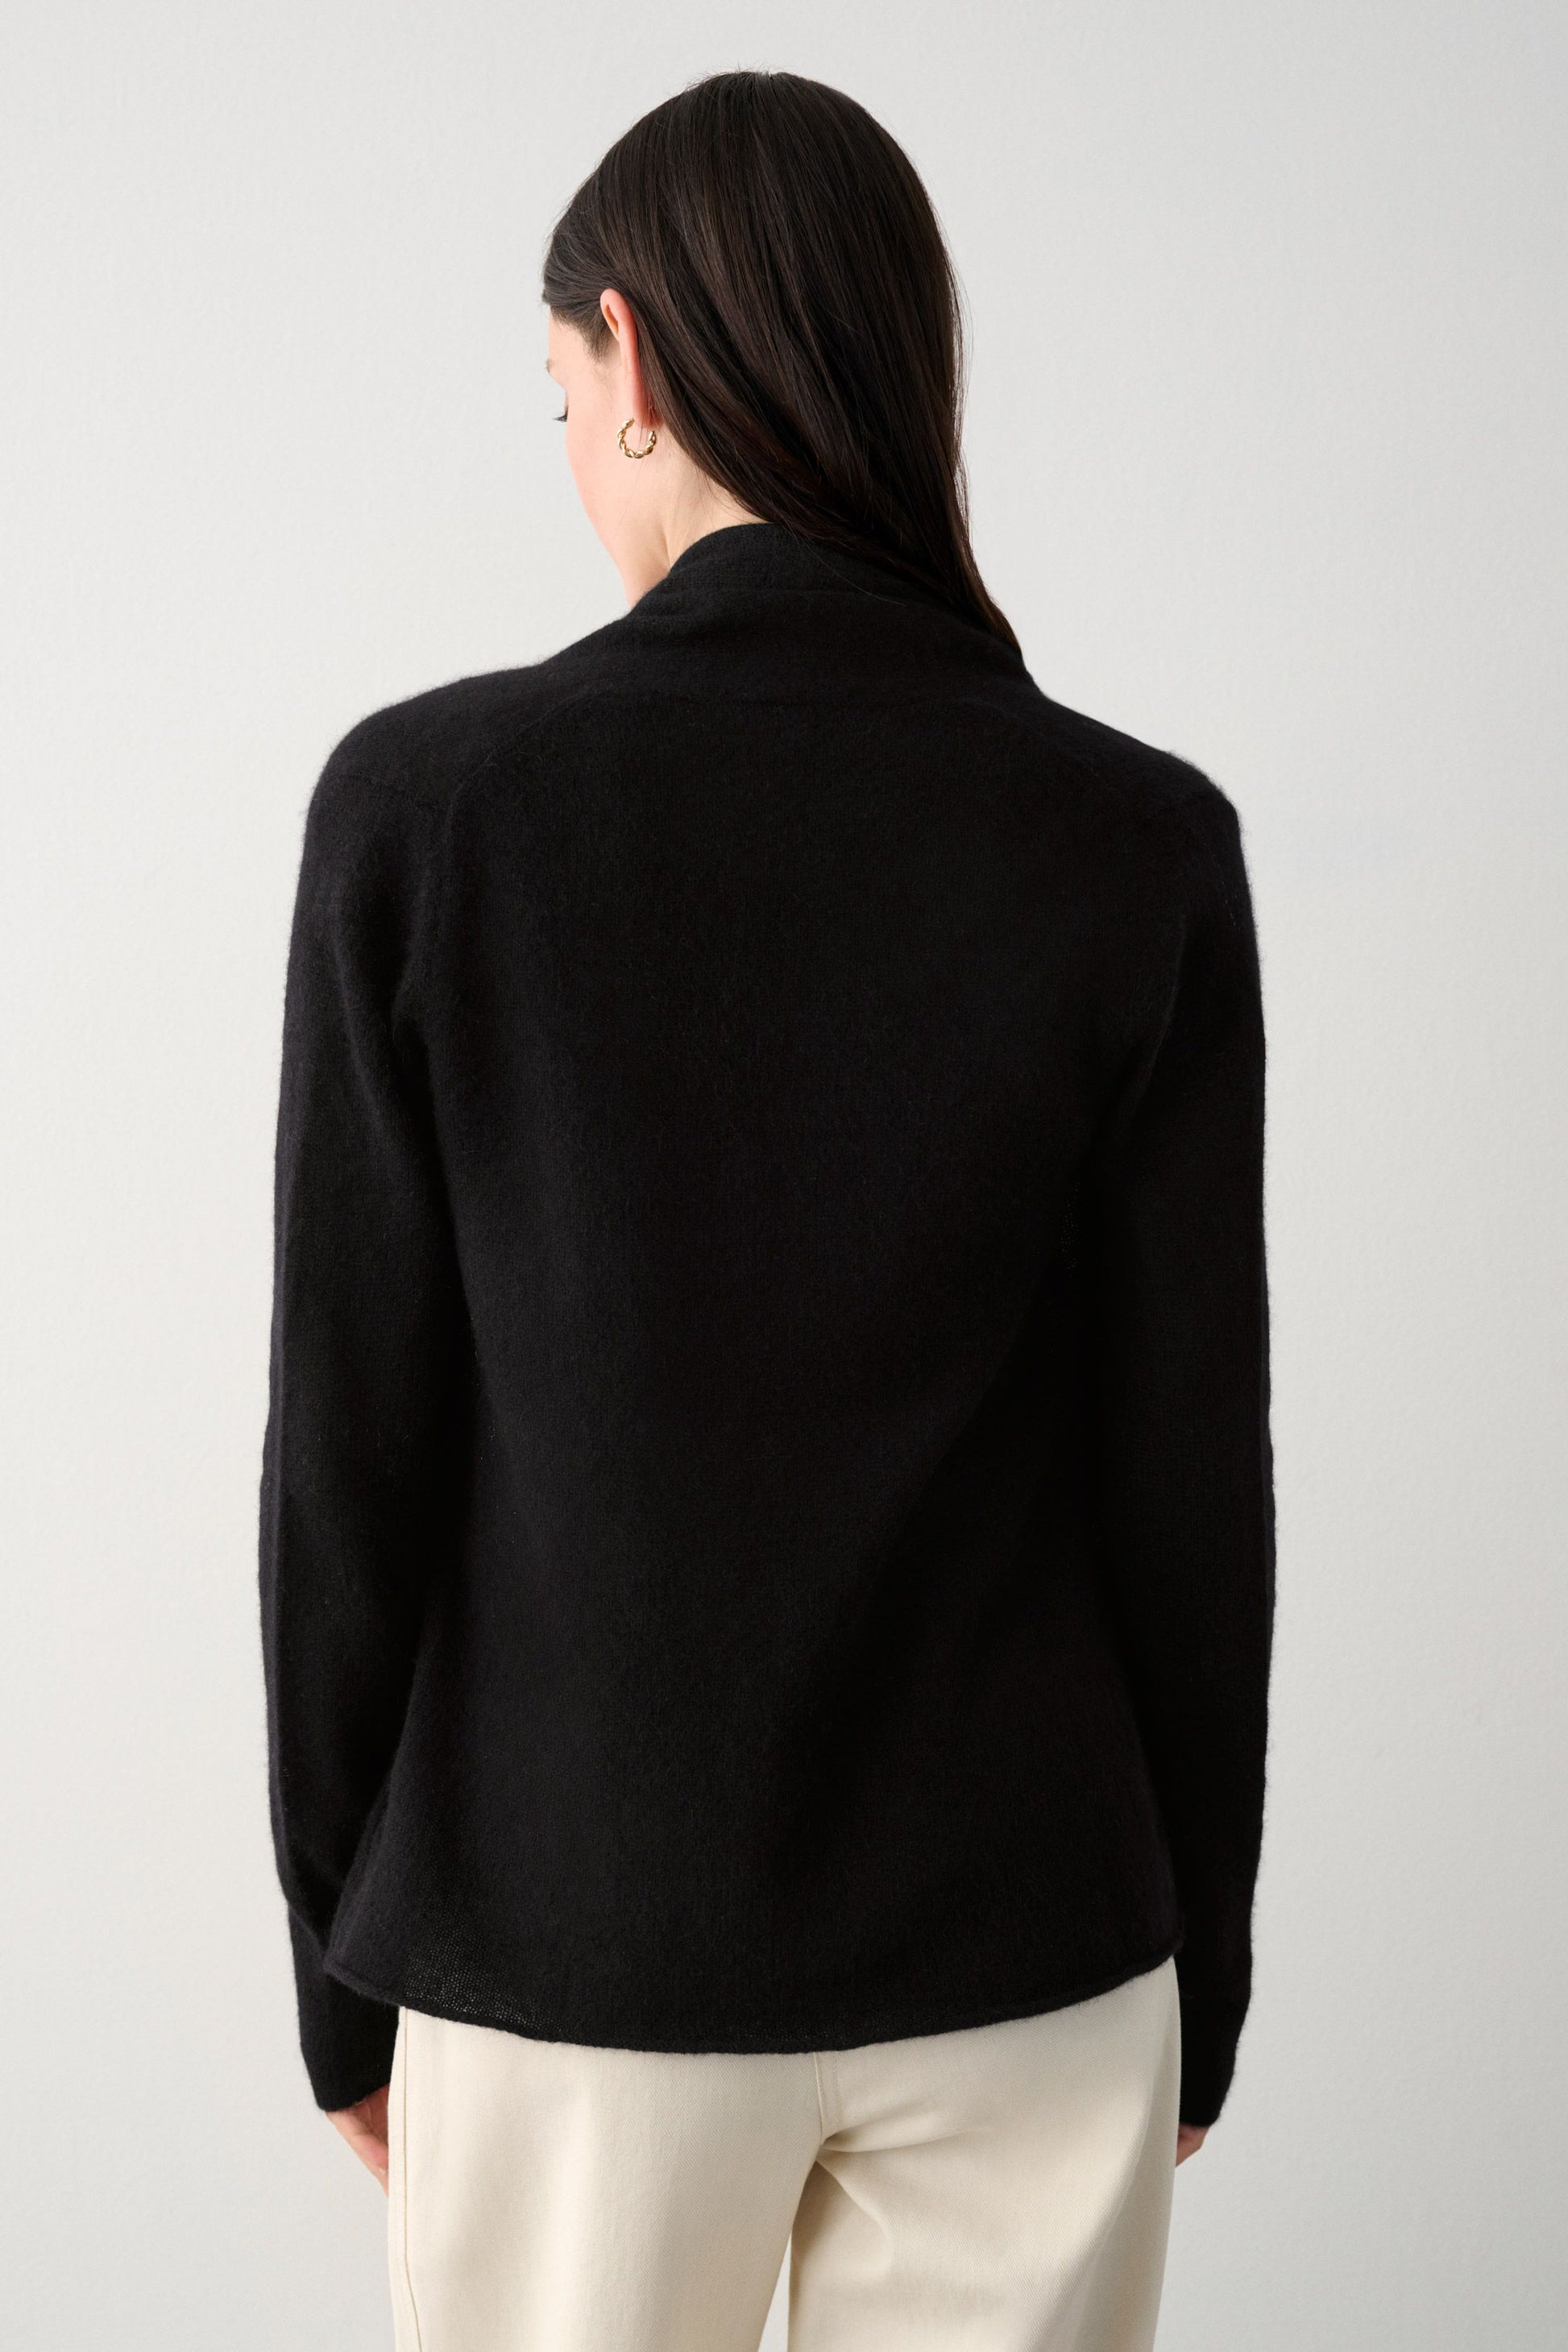 WHITE & WARREN - Women's Sustainable Eco-Friendly Sweaters - Traceable Ethically Sourced Cashmere Cowl Neck Open Cardigan - True Black